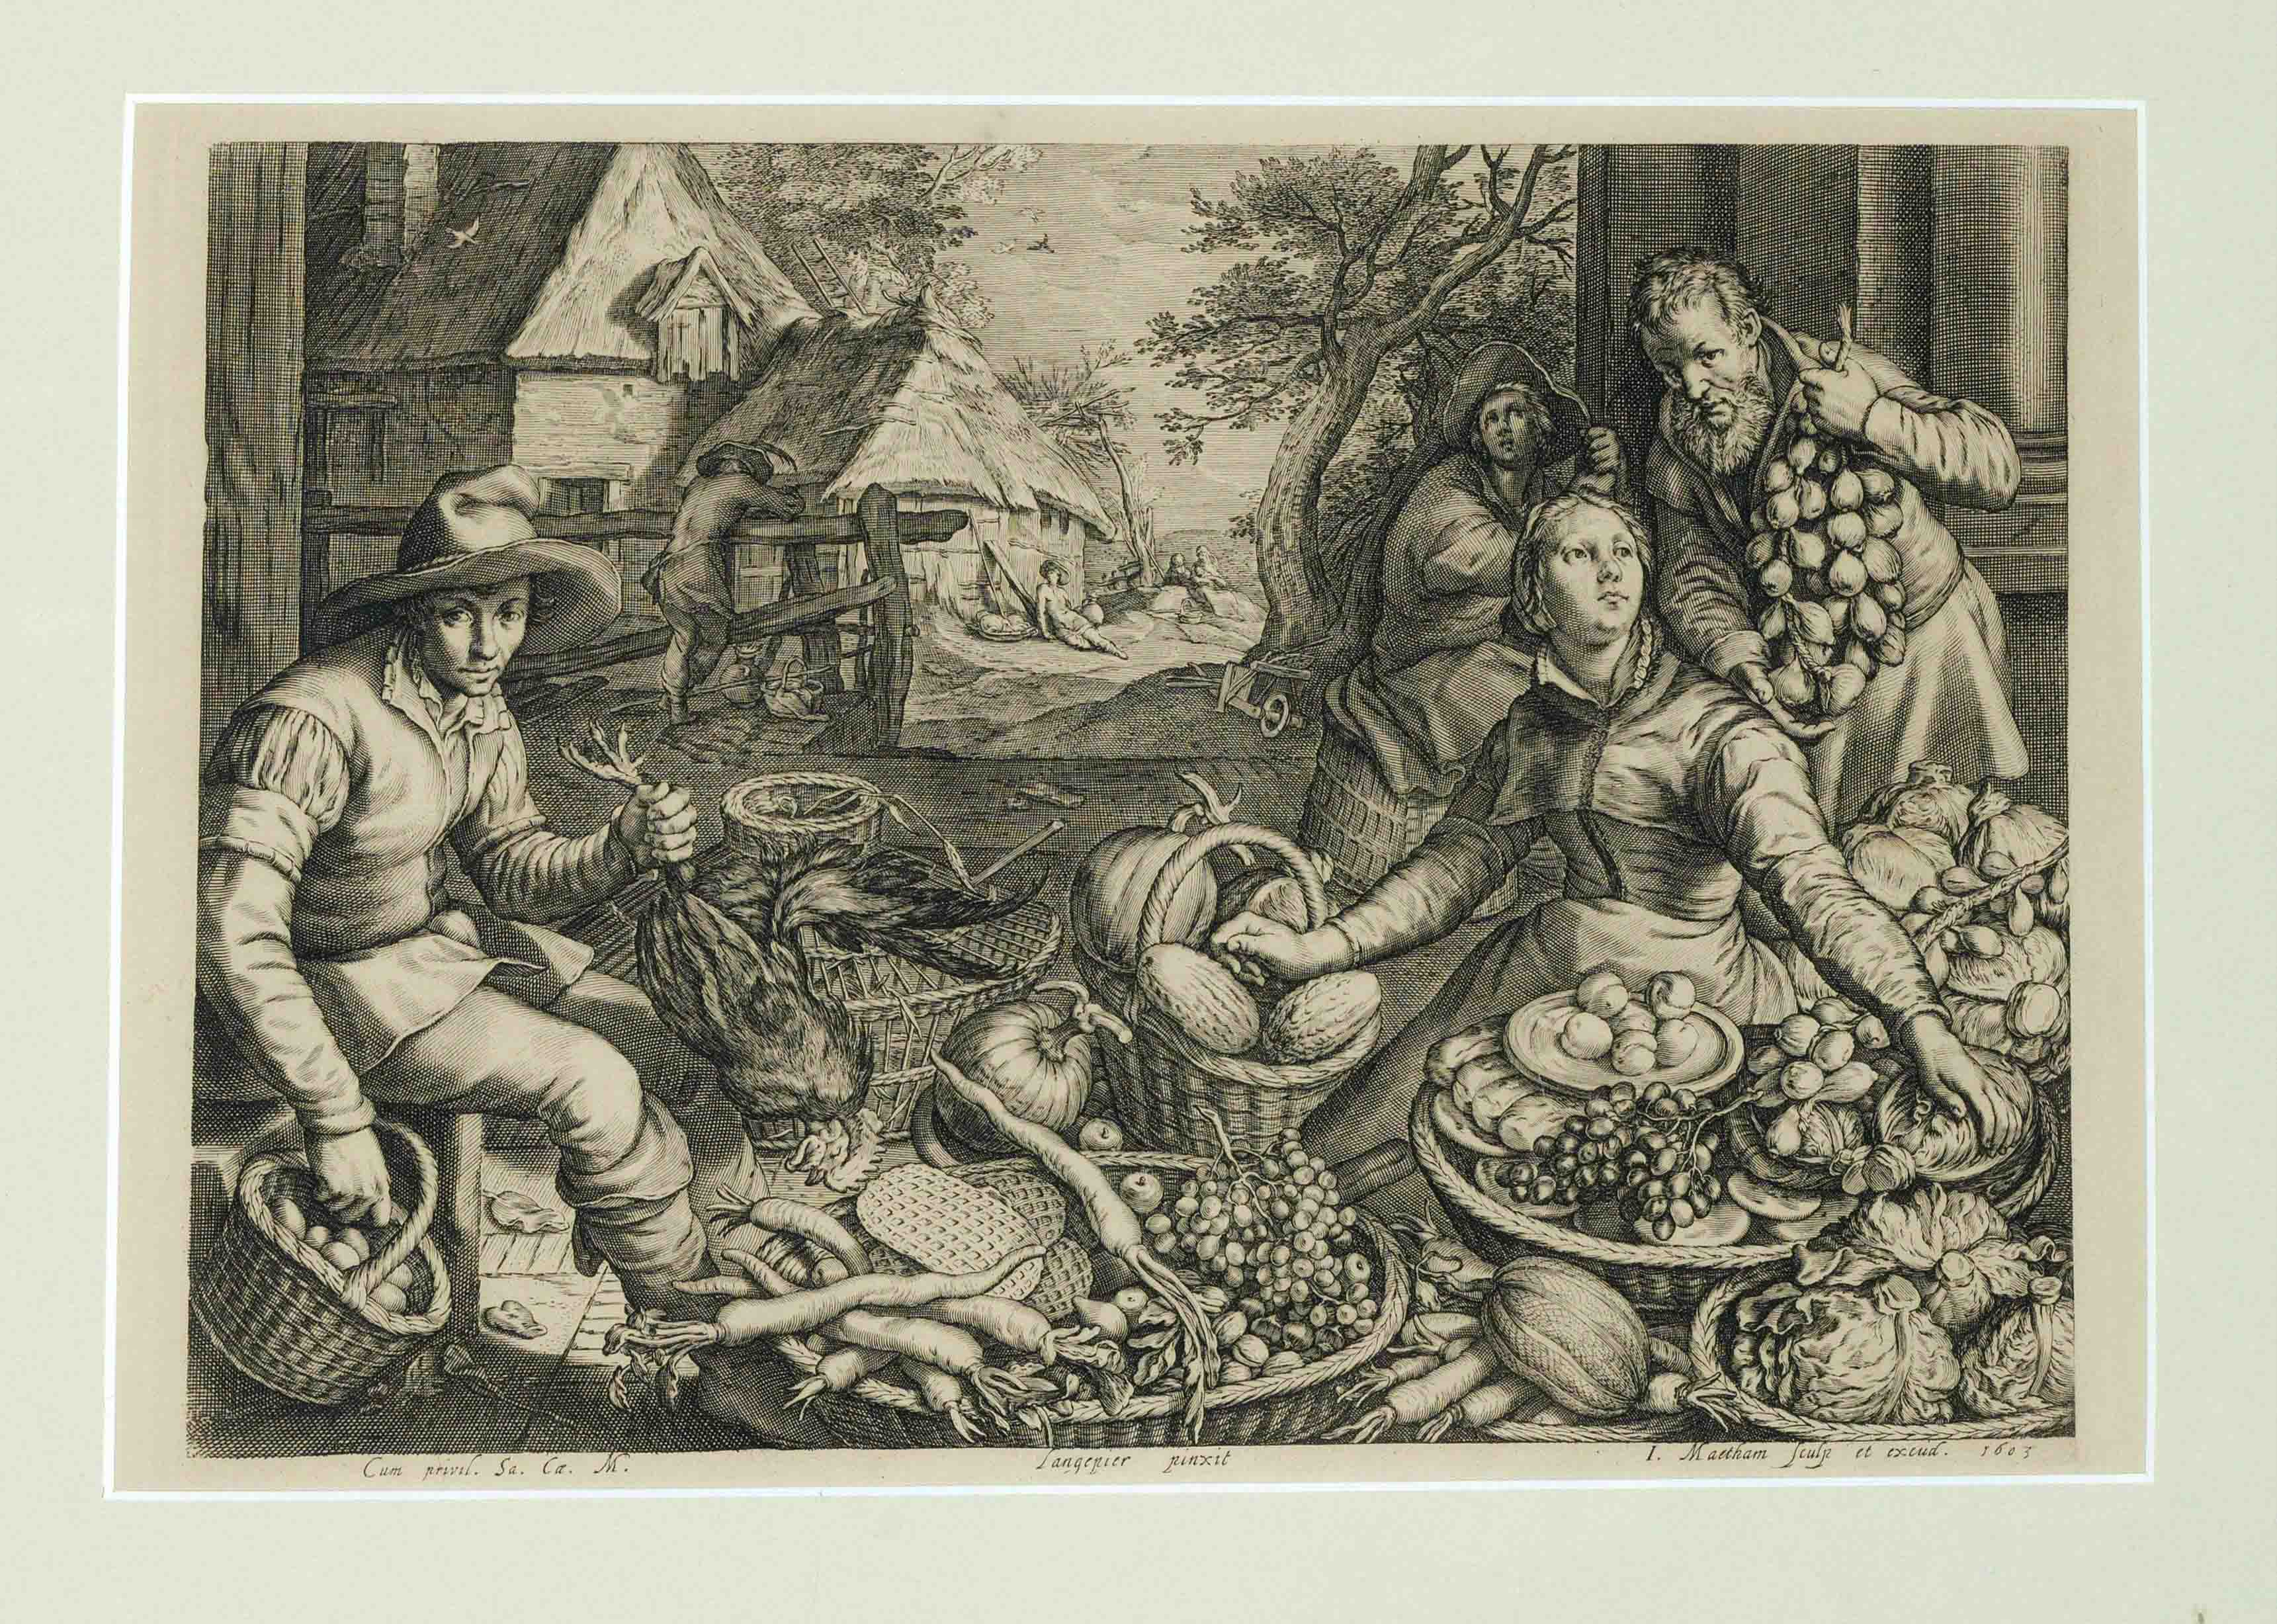 Jacob Matham (1571-1631), Market Scene, in the Background a Biblical Depiction of the Flight into